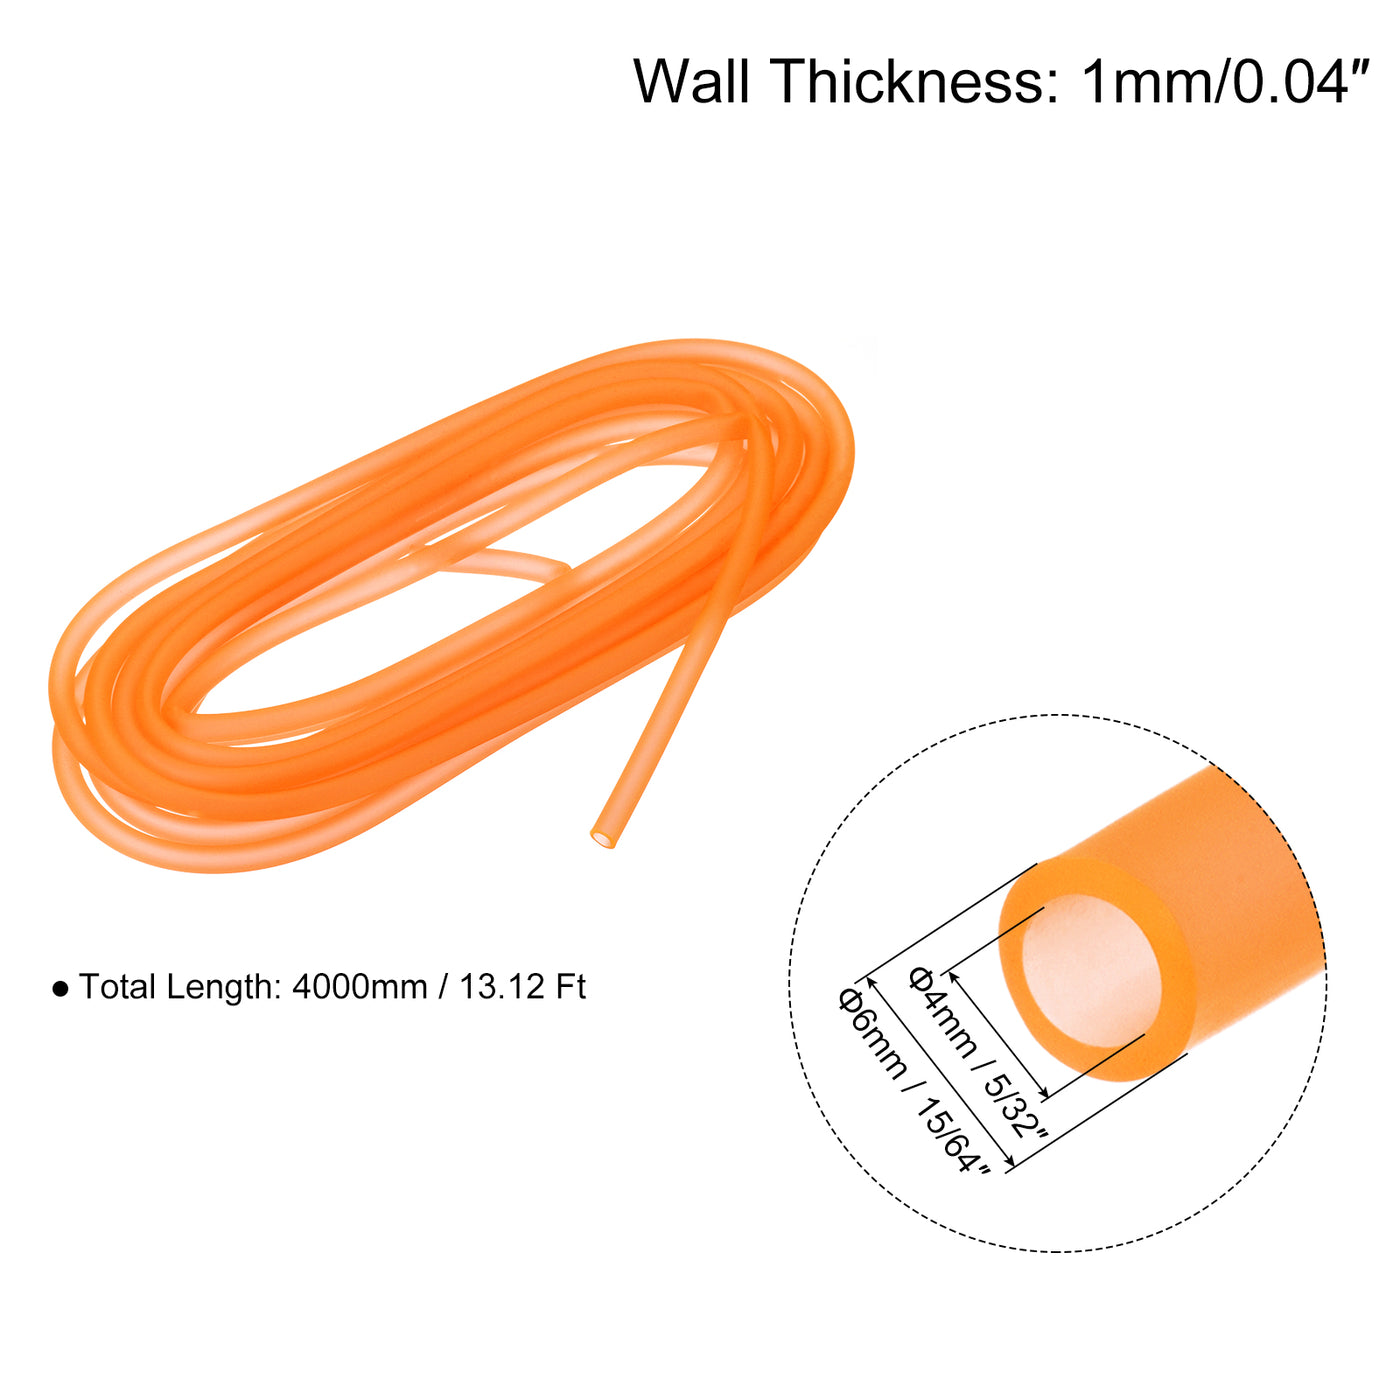 uxcell Uxcell Silicone Tubing 5/32" ID, 15/64" OD 4Pcs 13.12 Ft for Pump Transfer, Orange